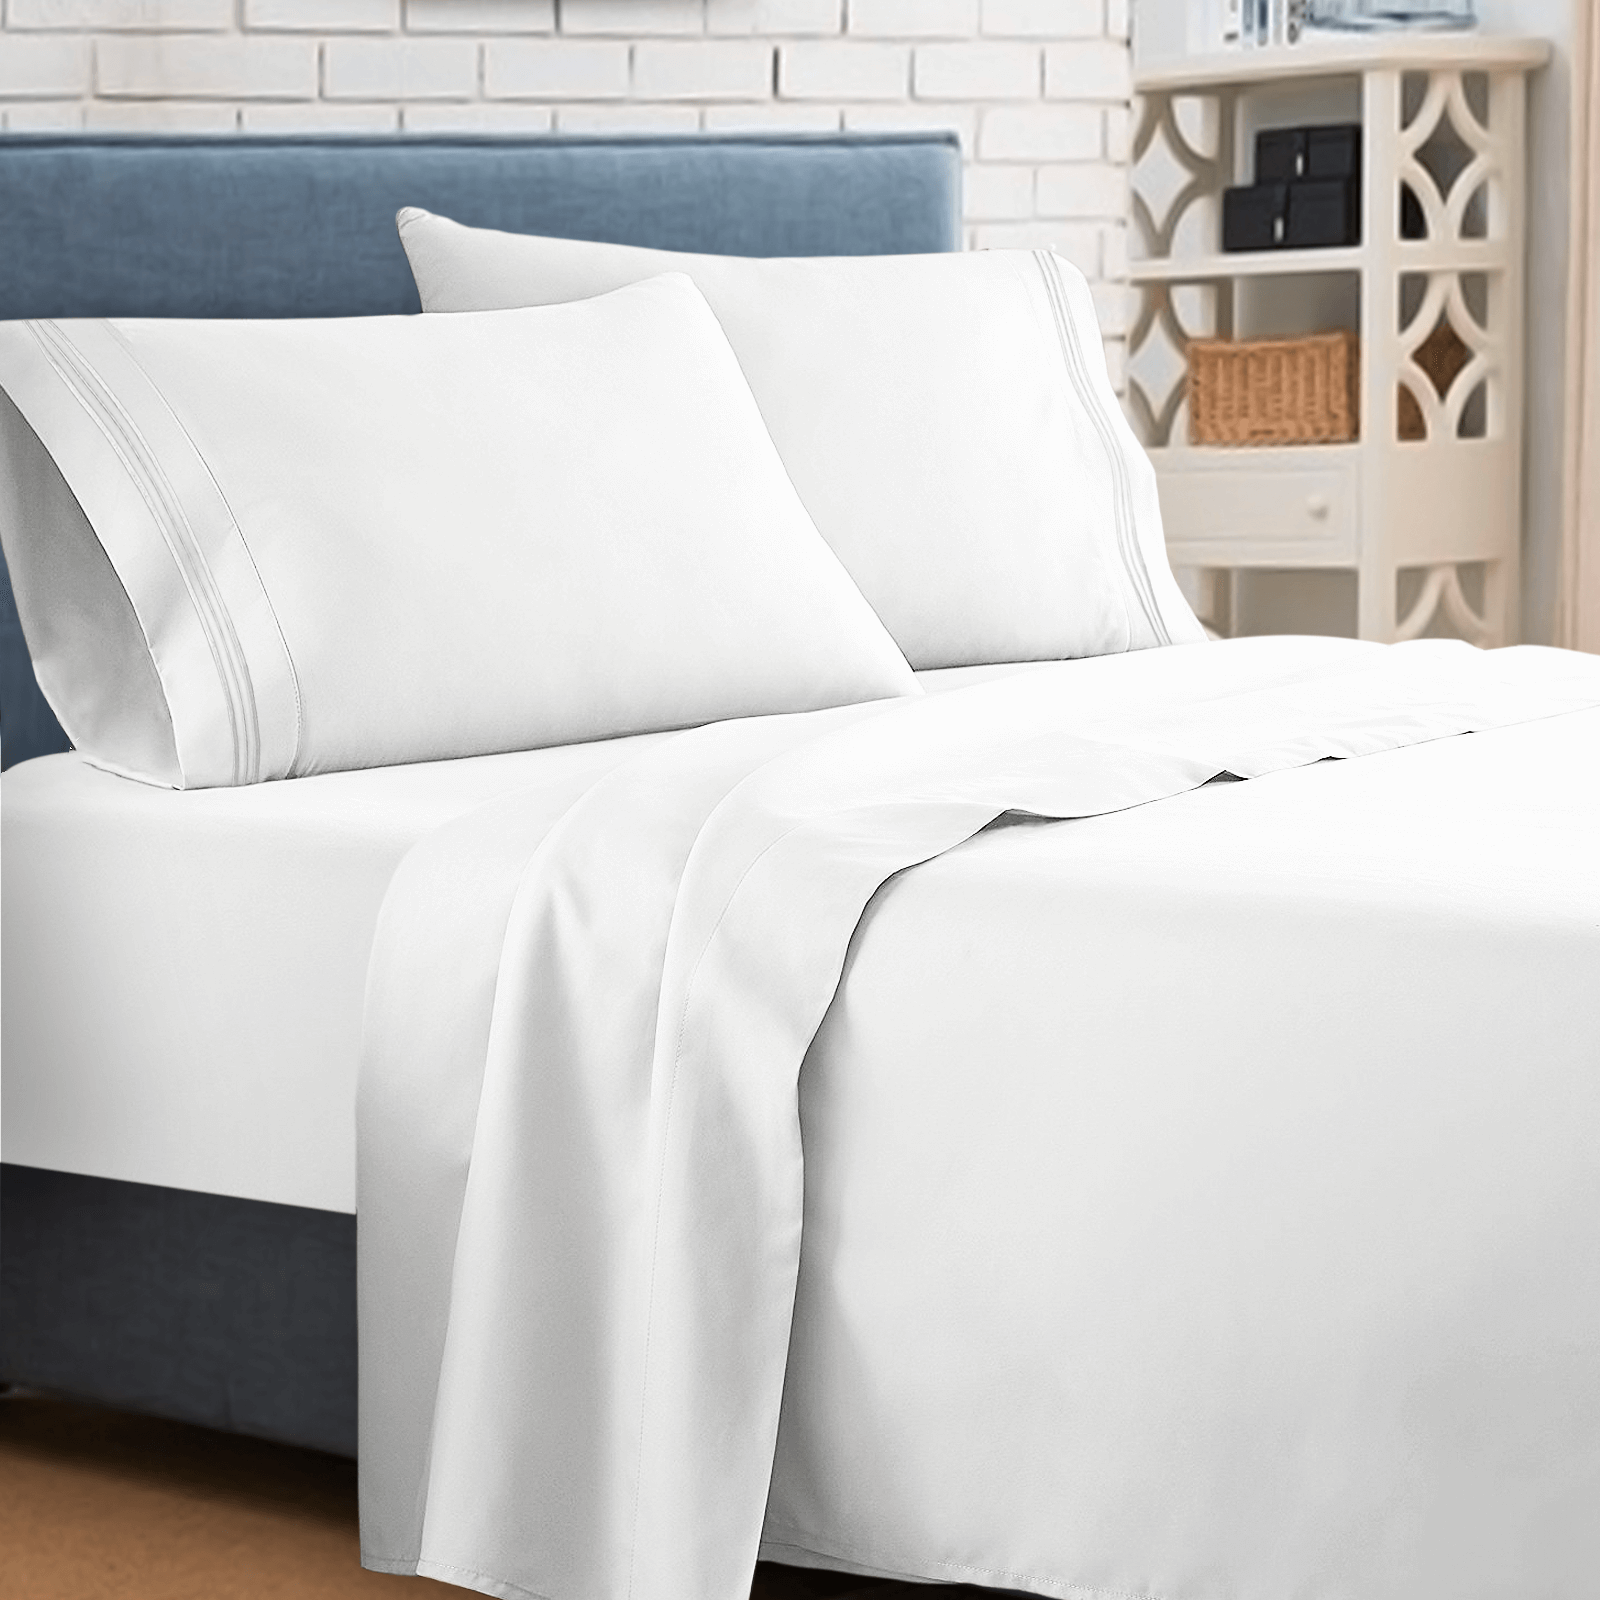 Clara Clark bed sheets are the best bed sheets for Airbnb owners and hotel managers by Graham Colligan